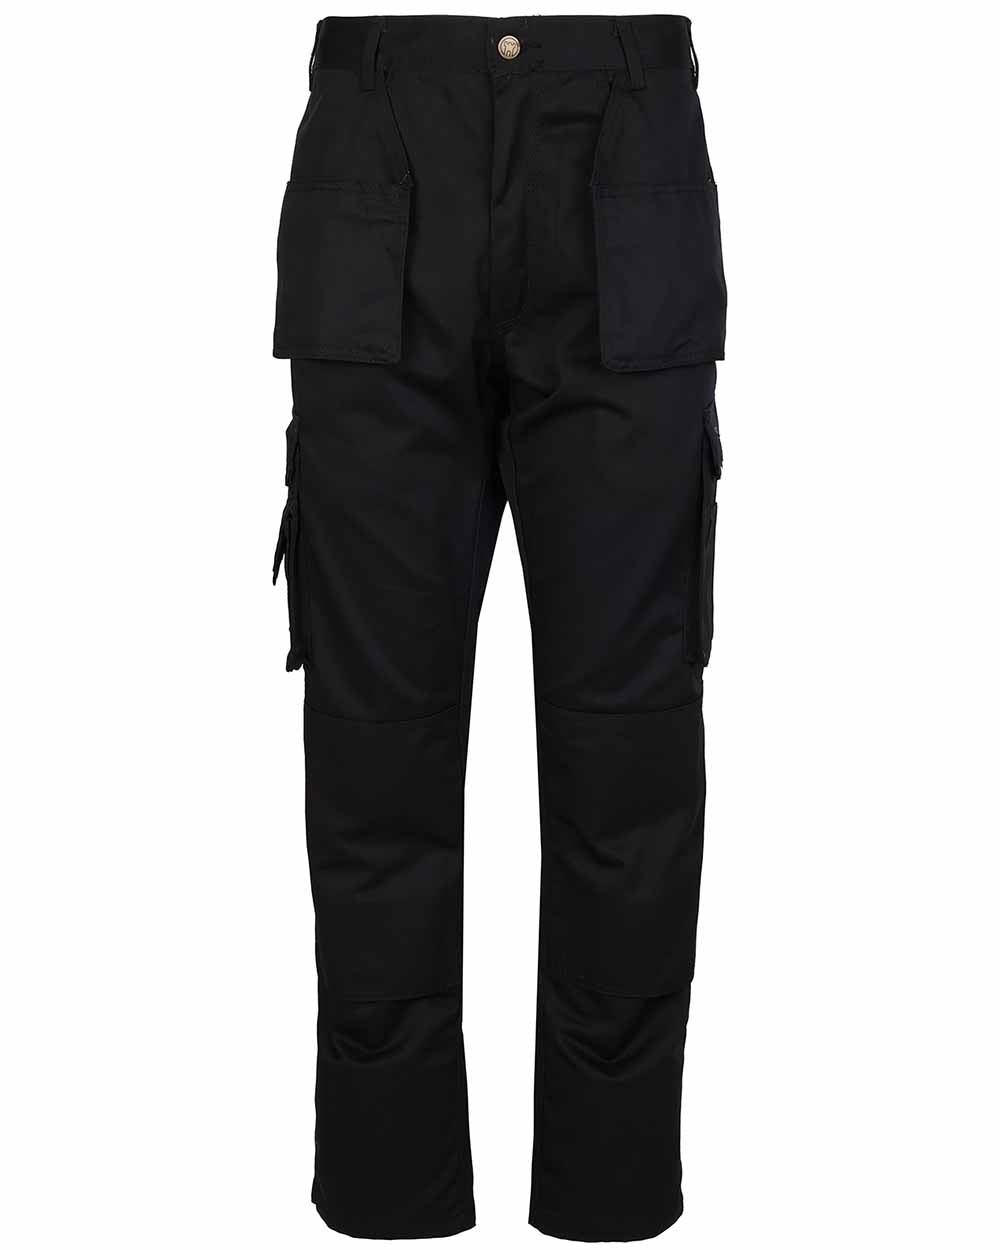 With pockets folded out TuffStuff Pro Work Trousers in Black 